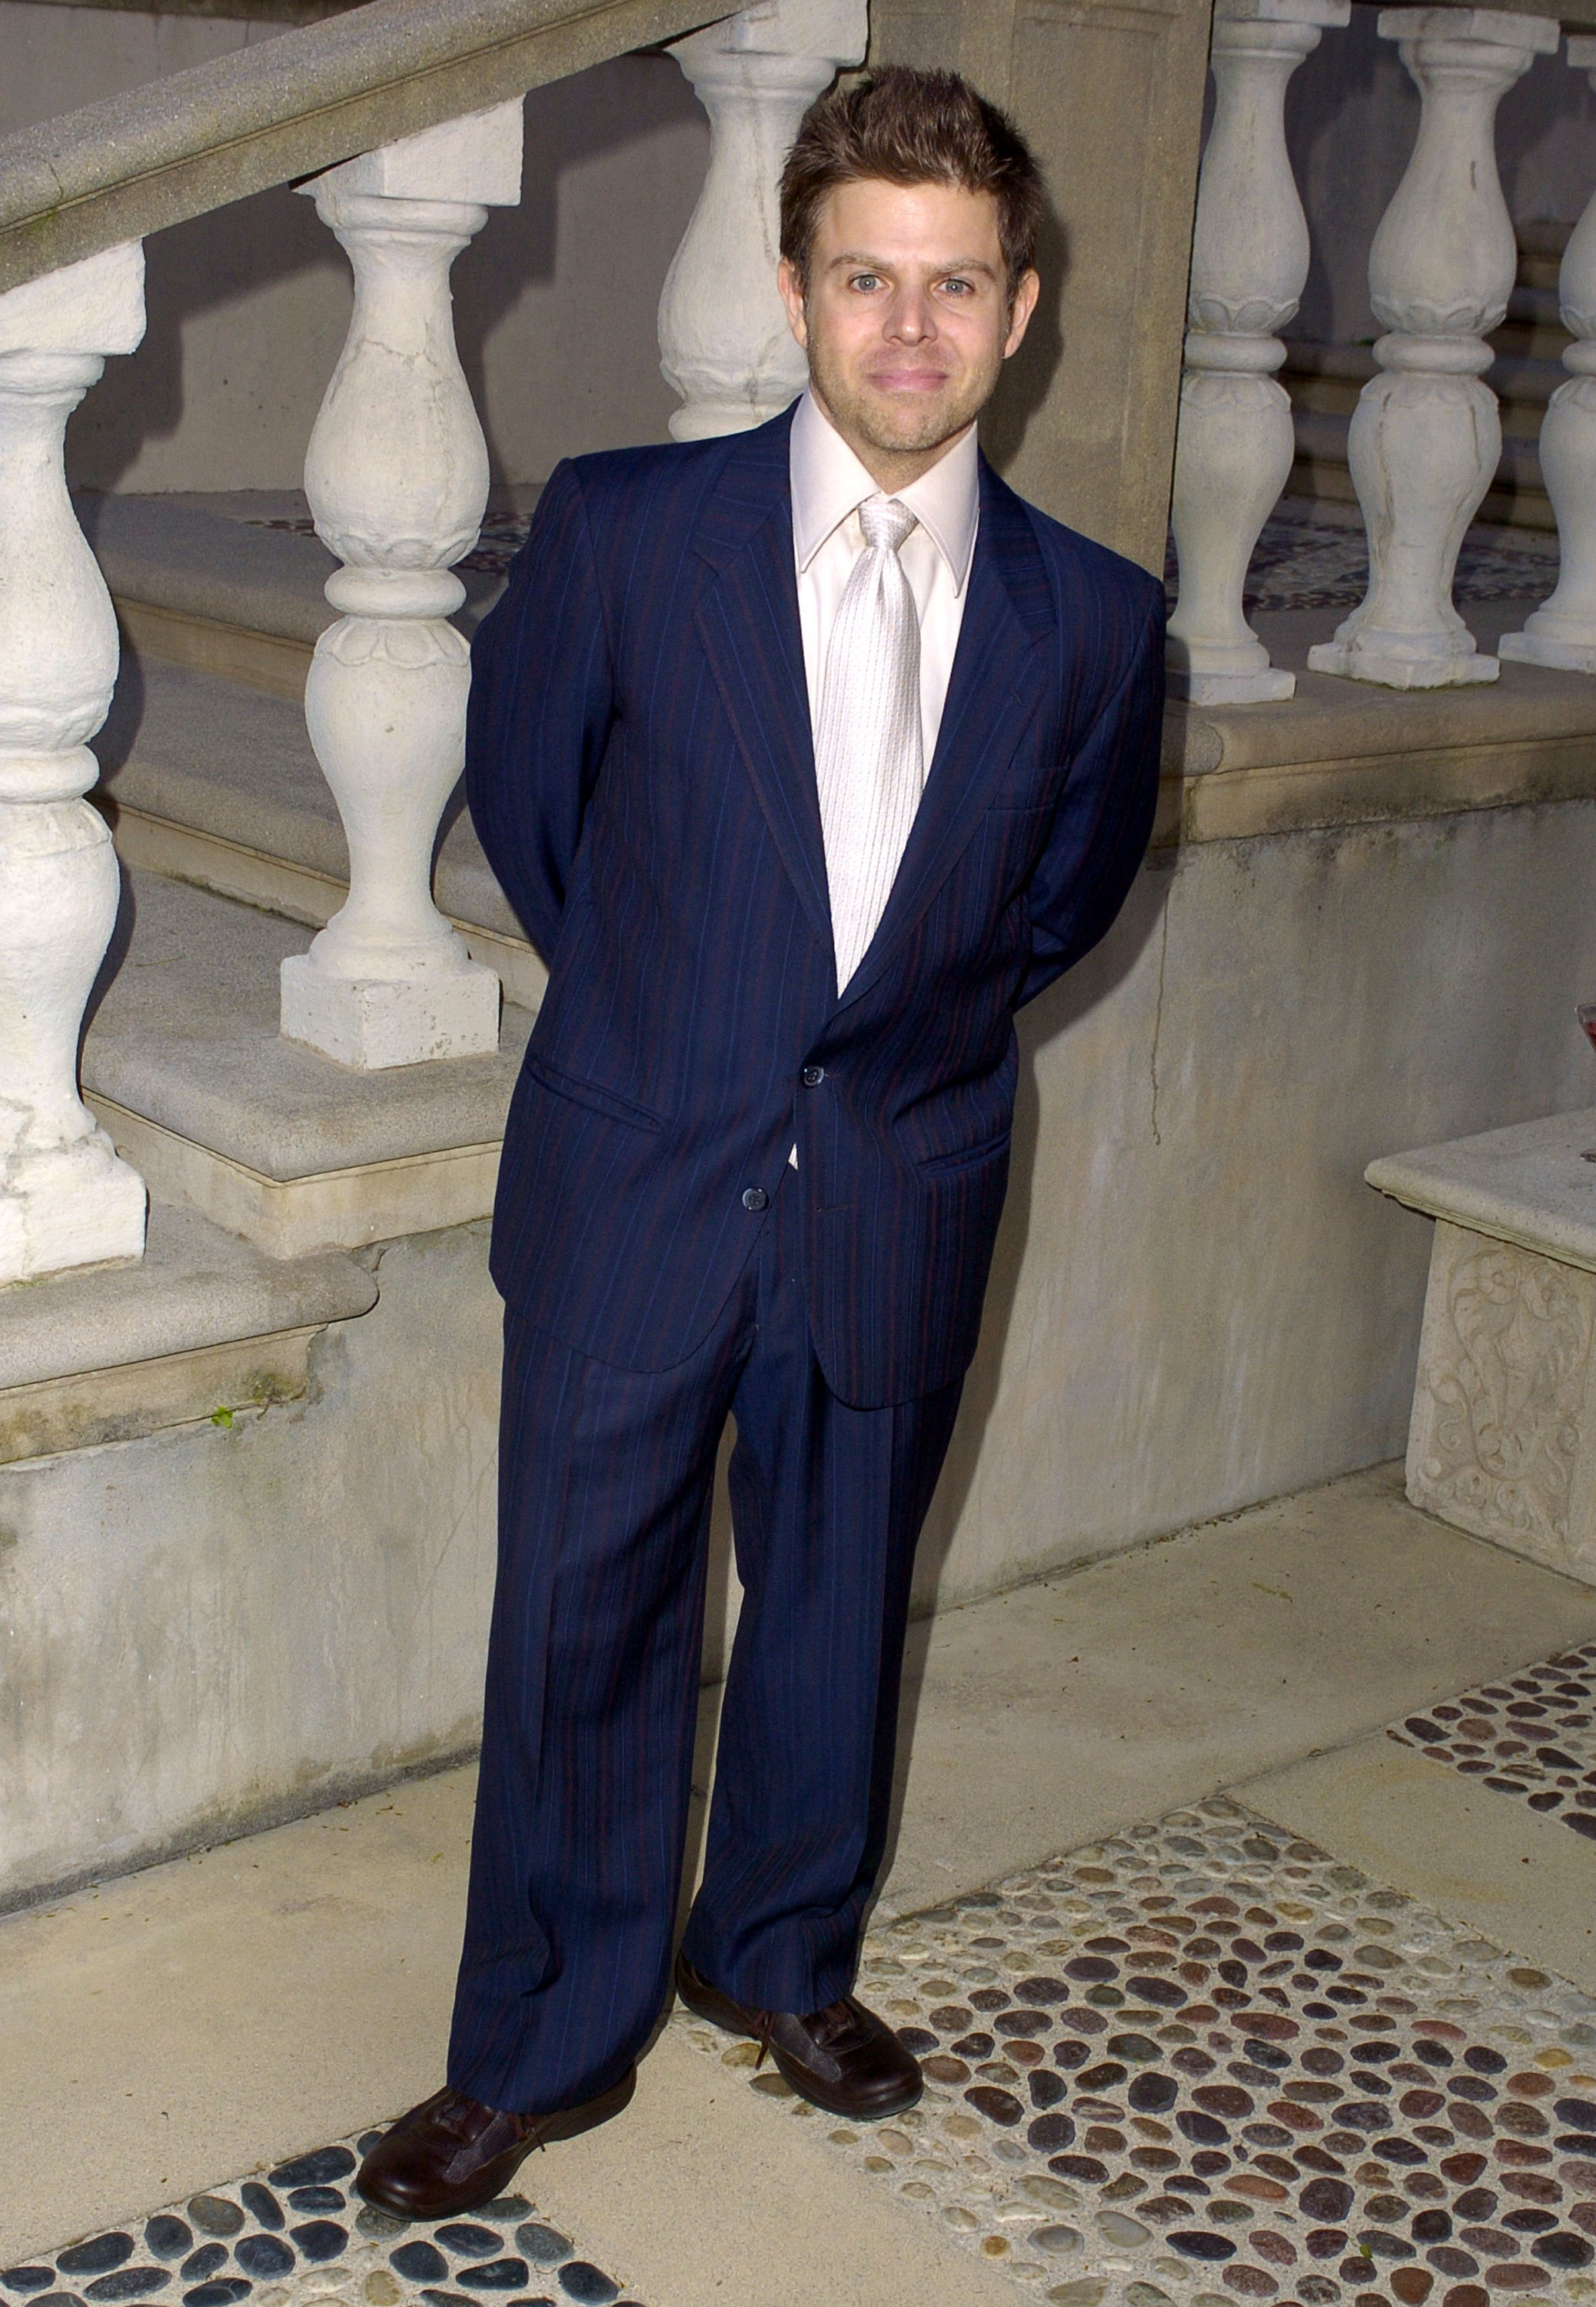 Adam Rich during Chrysalis Third Annual Butterfly Ball on April 17, 2004 in Bel Air, California | Source: Getty Images